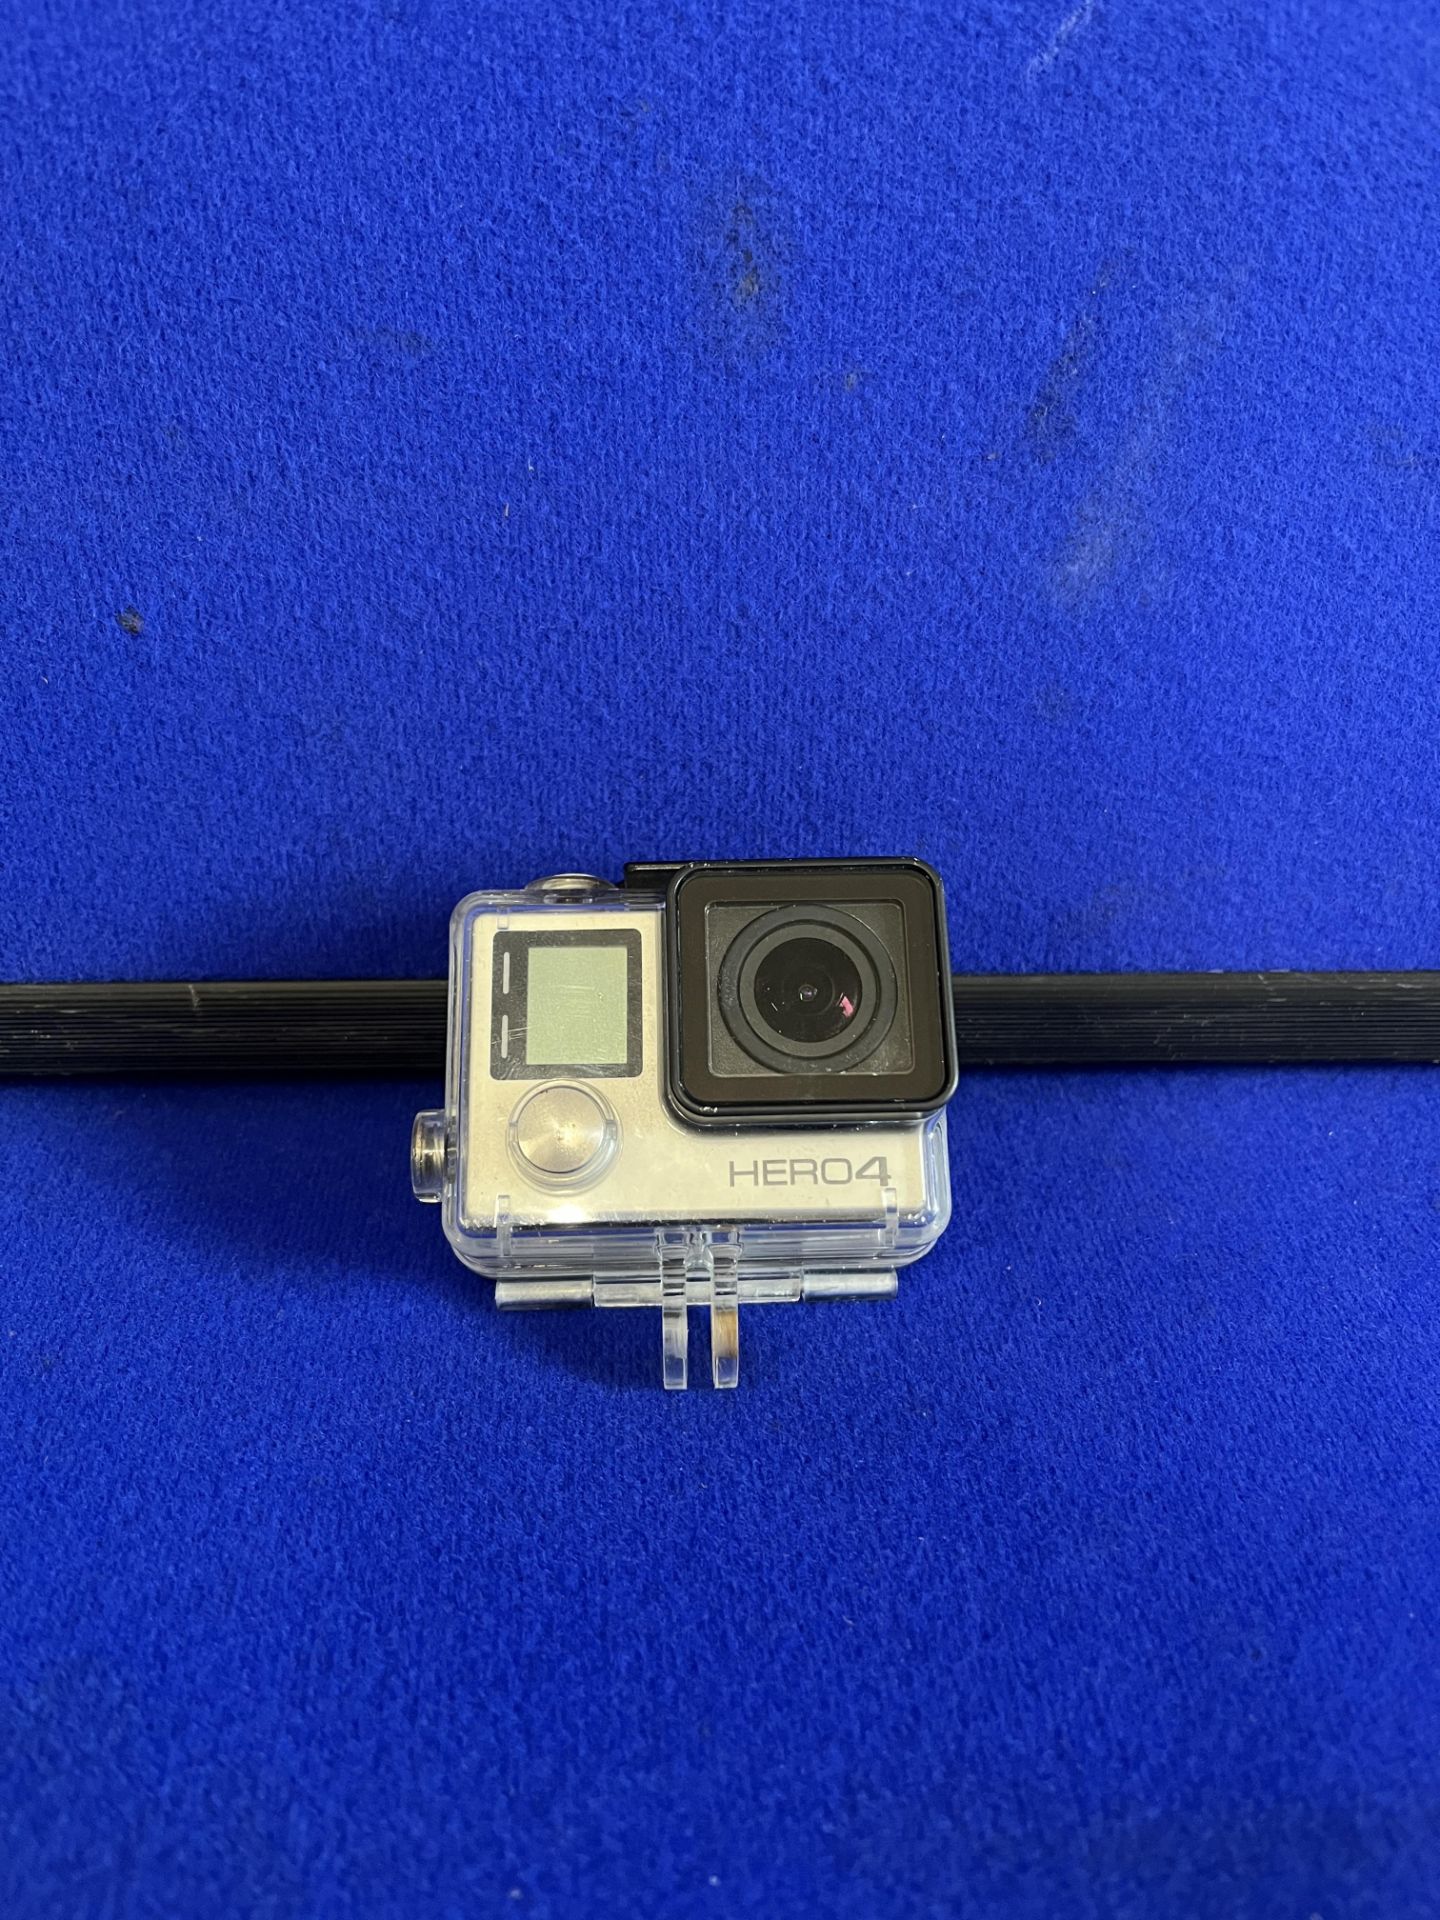 GoPro Hero 4 Camera with accessories - as pictured